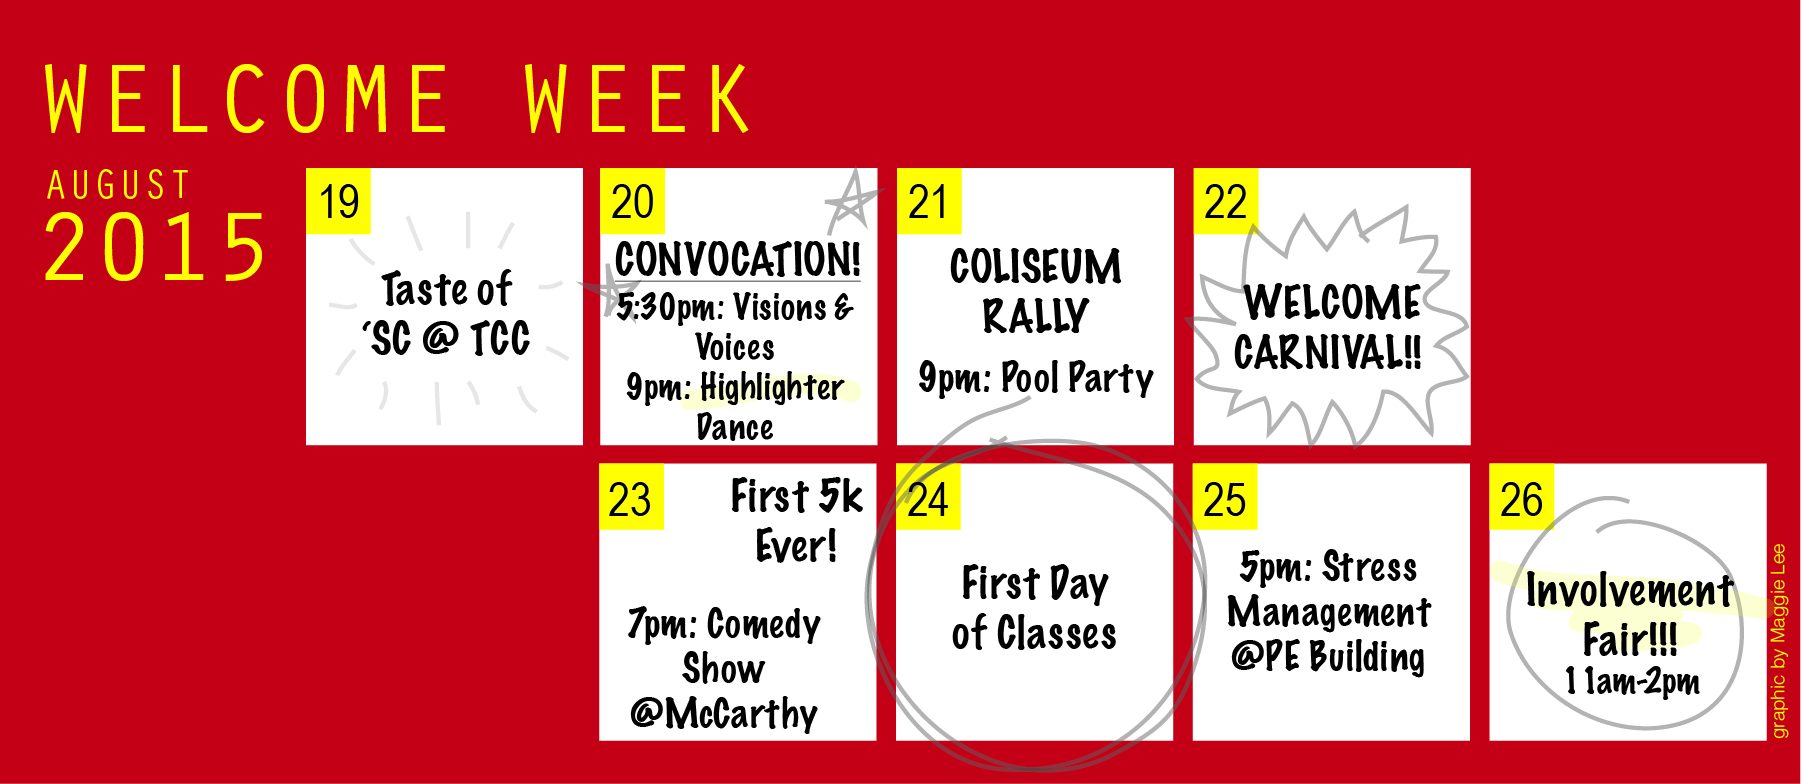 Welcome Week provides full schedule of activities - Daily Trojan